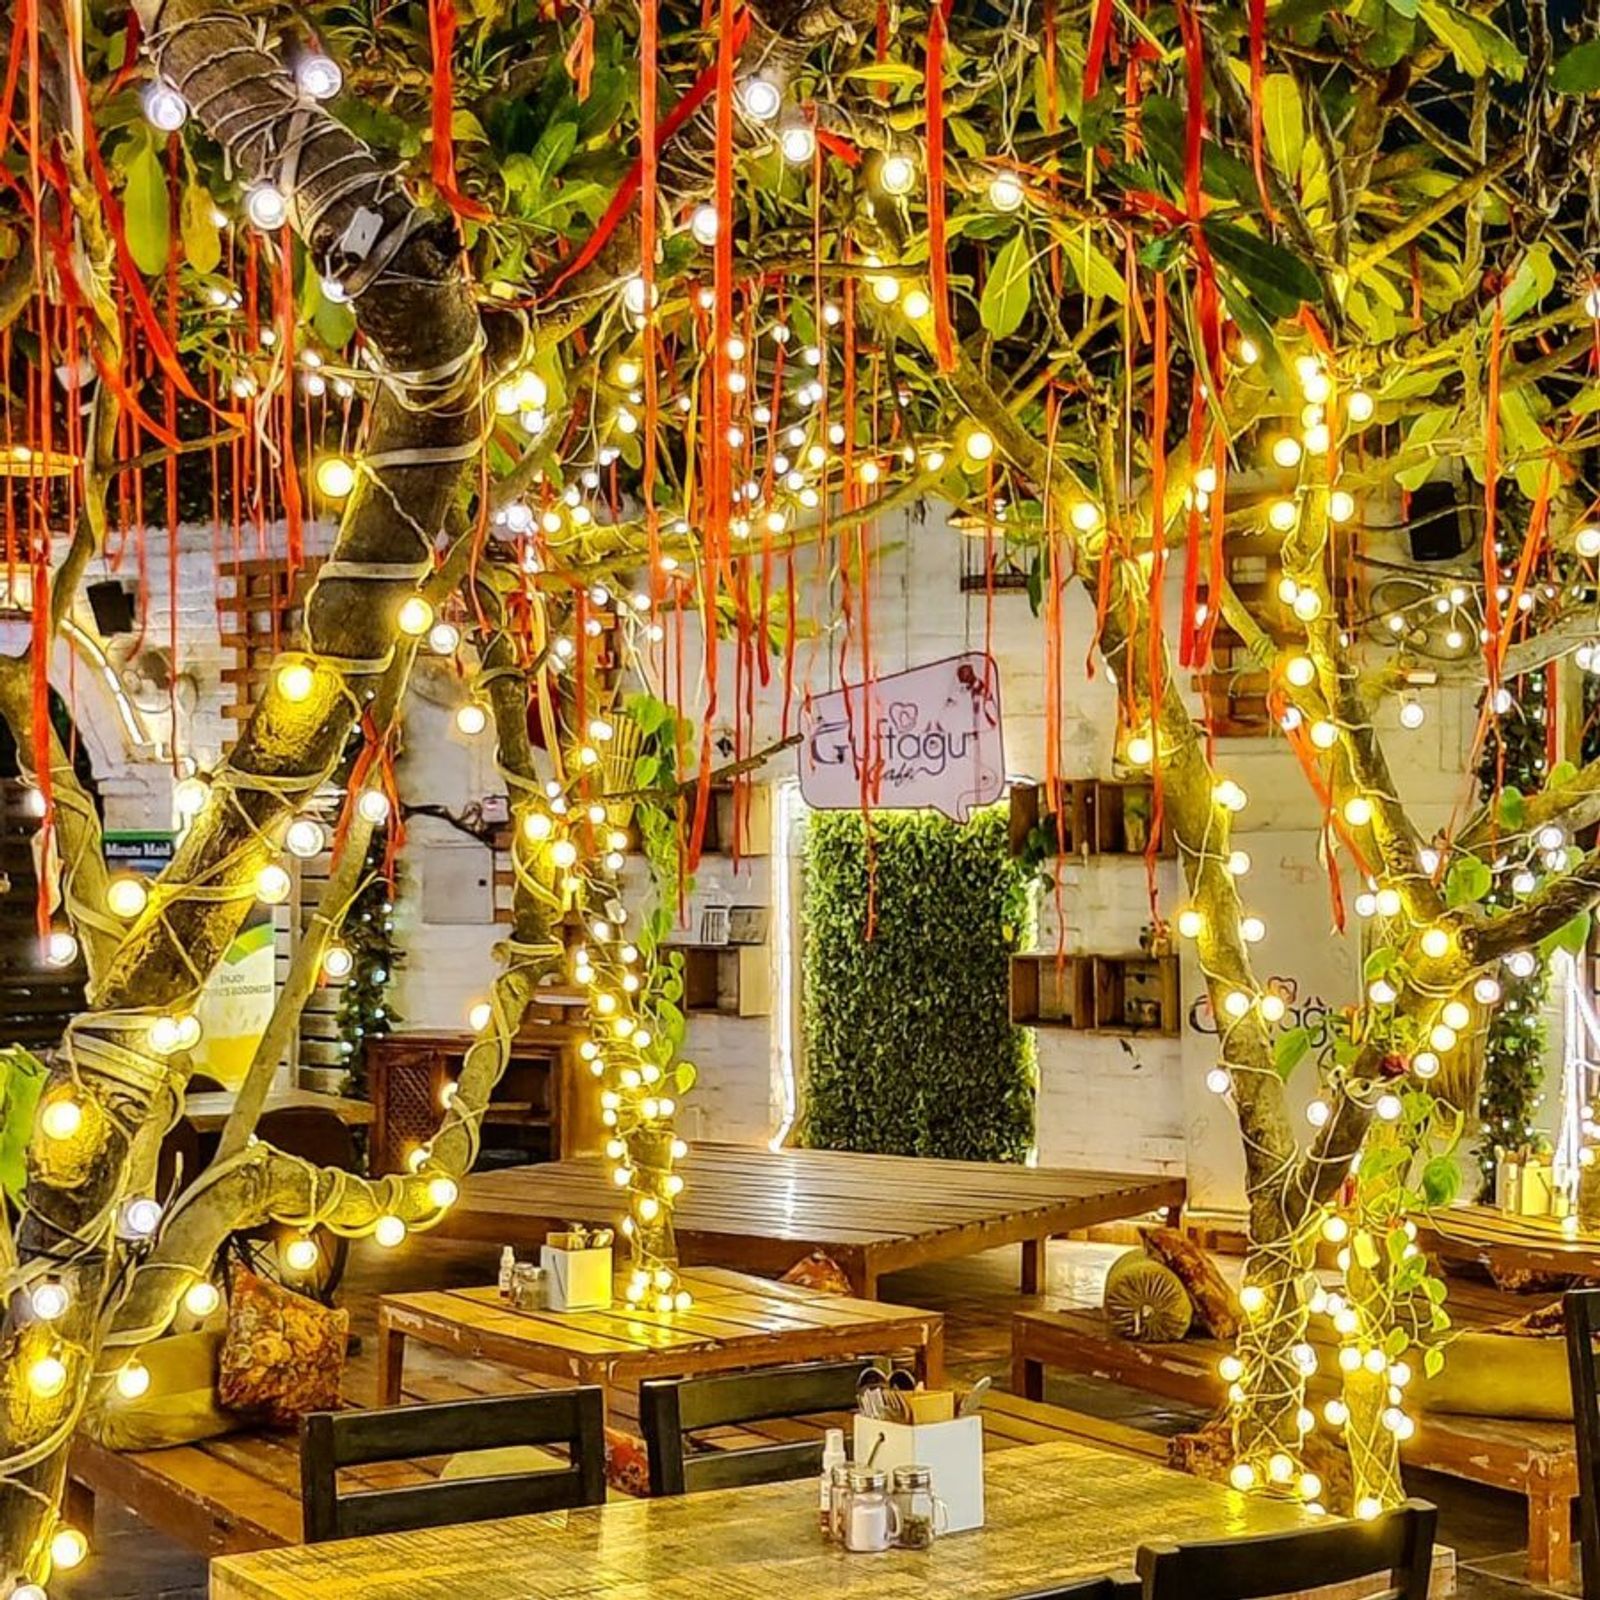 10 cafes in Gurgaon that offer a memorable fare and an unparalleled vibe